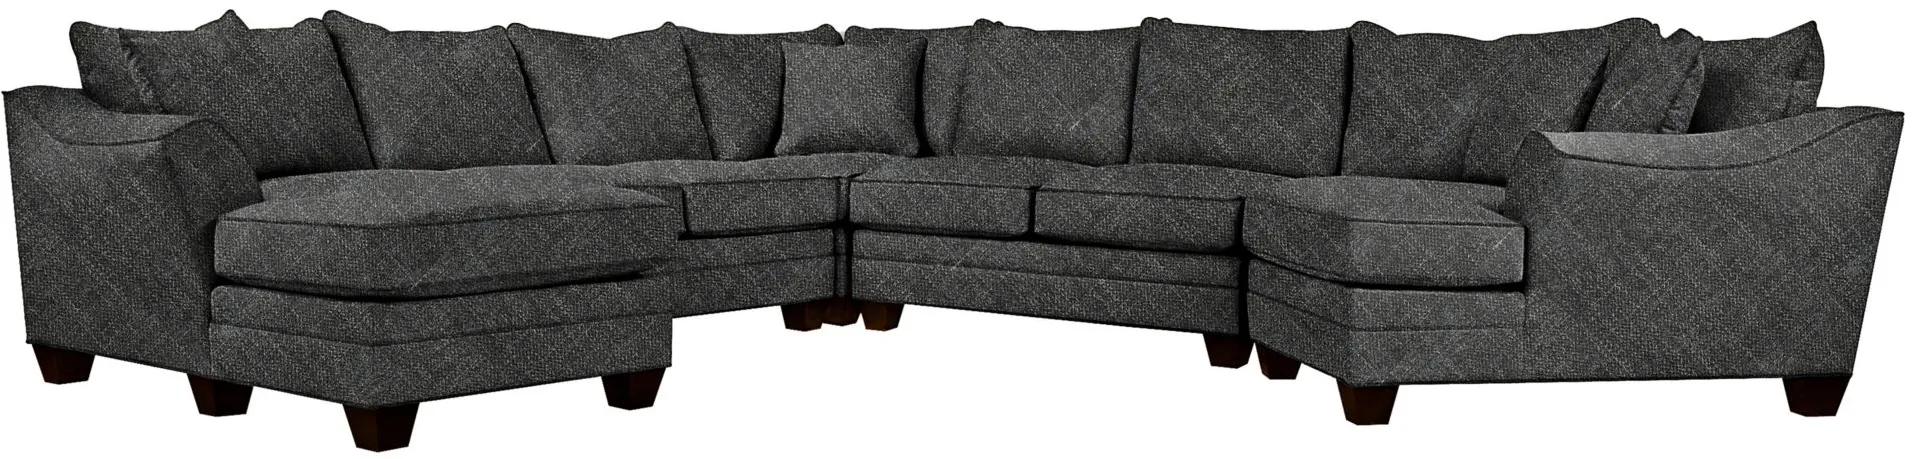 Foresthill 5-pc. Left Hand Facing Sectional Sofa in Elliot Graphite by H.M. Richards